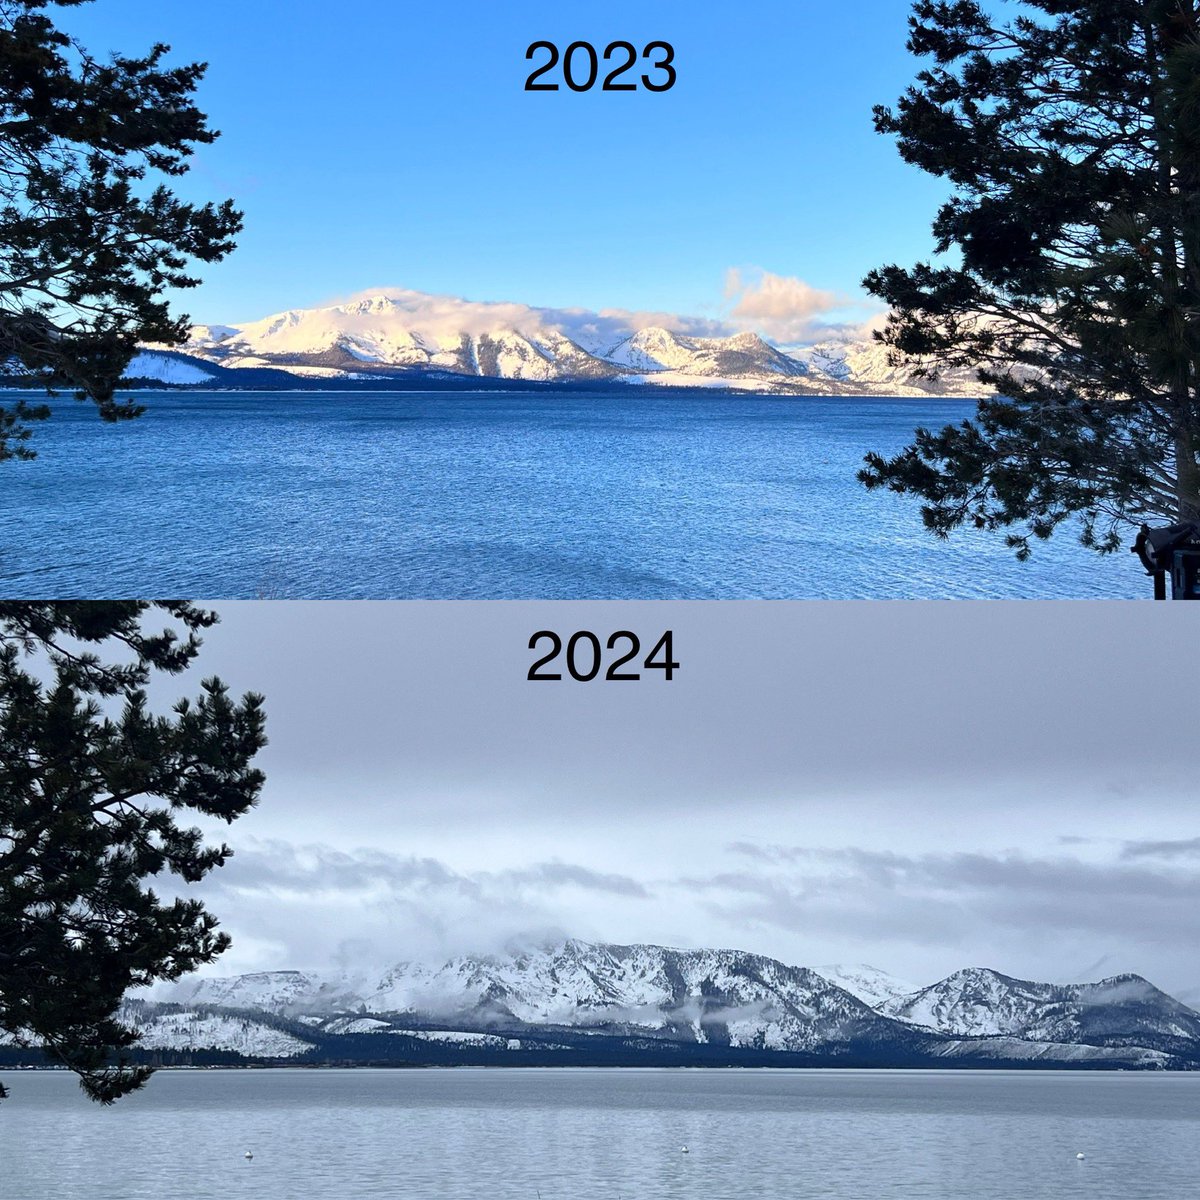 Another one year comparison from the same spot @EdgewoodTahoe. Record snow last year vs. hardly any this year. Again, more snow in @visitmusiccity than @Visit_LakeTahoe! Uncharacteristic of El Niño pattern, which we are discussing @ #OSSTahoe. #DefinitelyDifferent